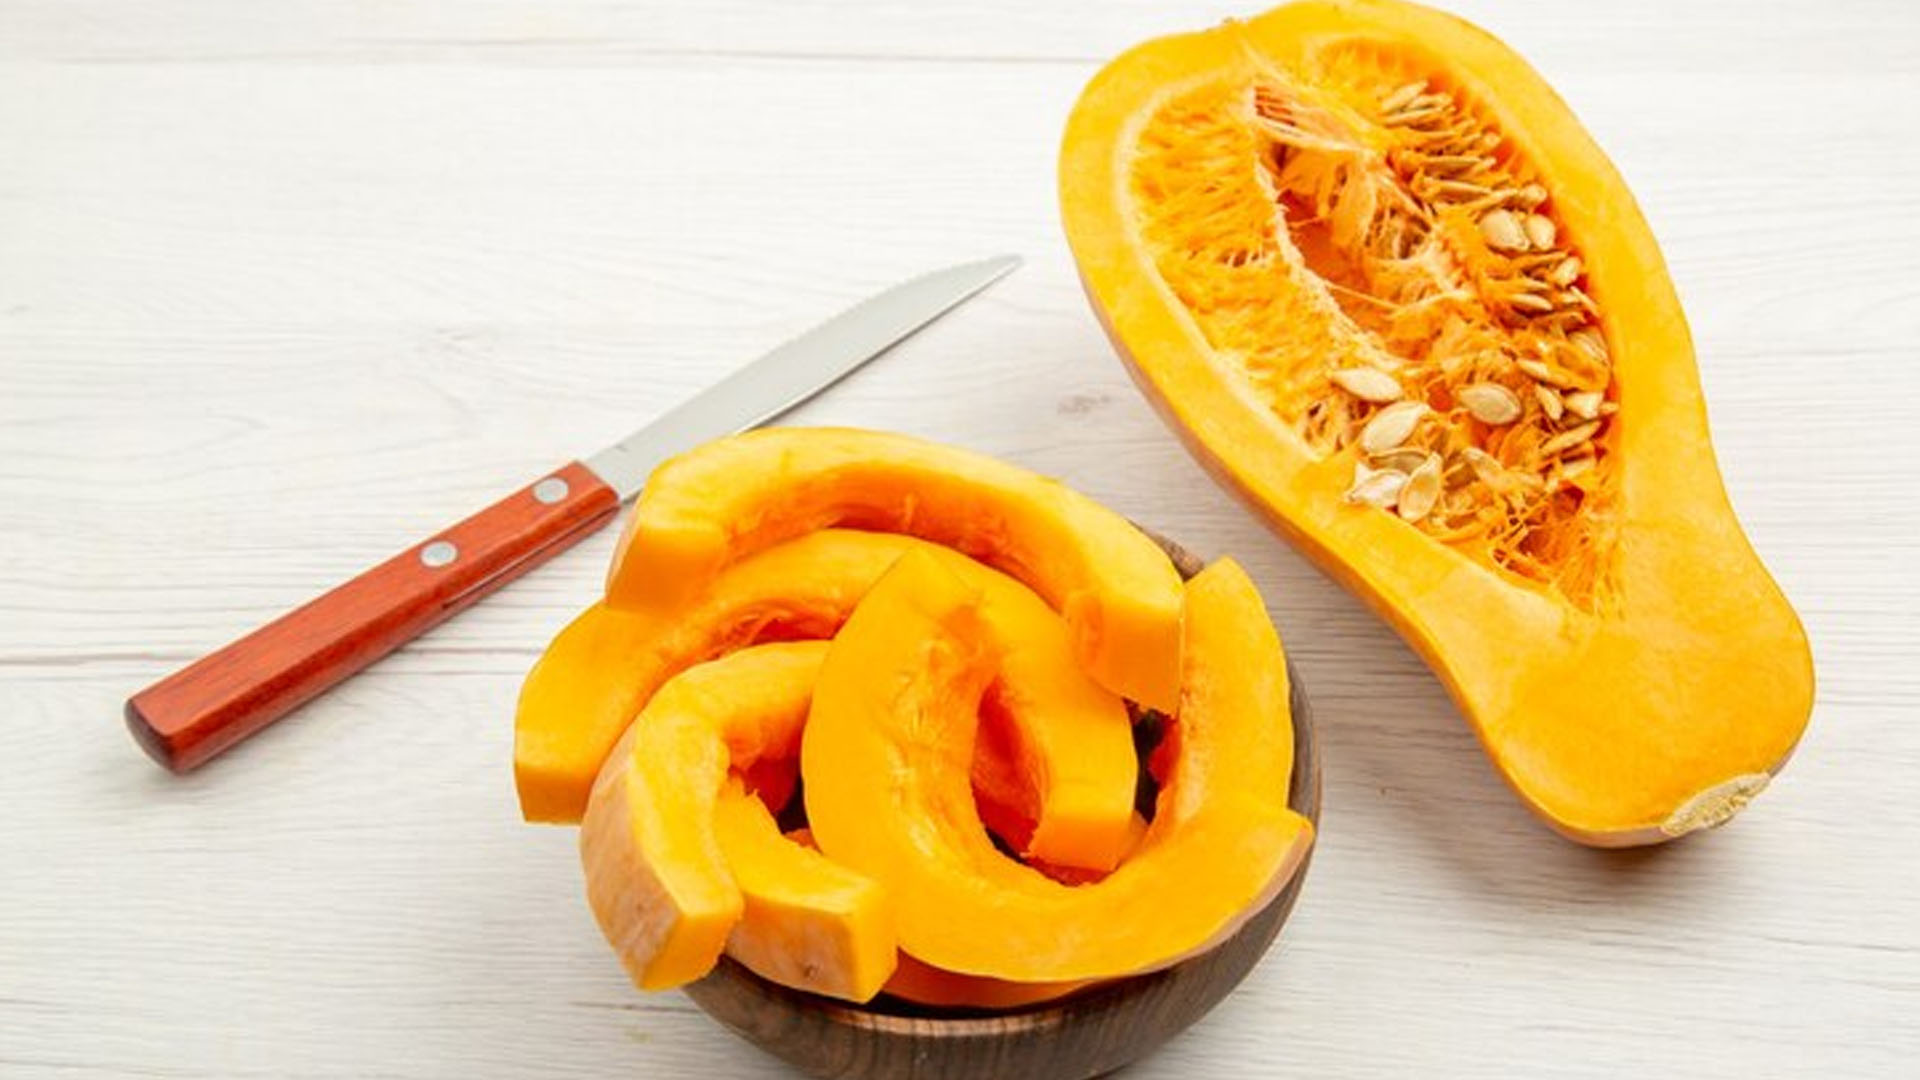 What Are Some Health Benefits Of Butternut Squash?